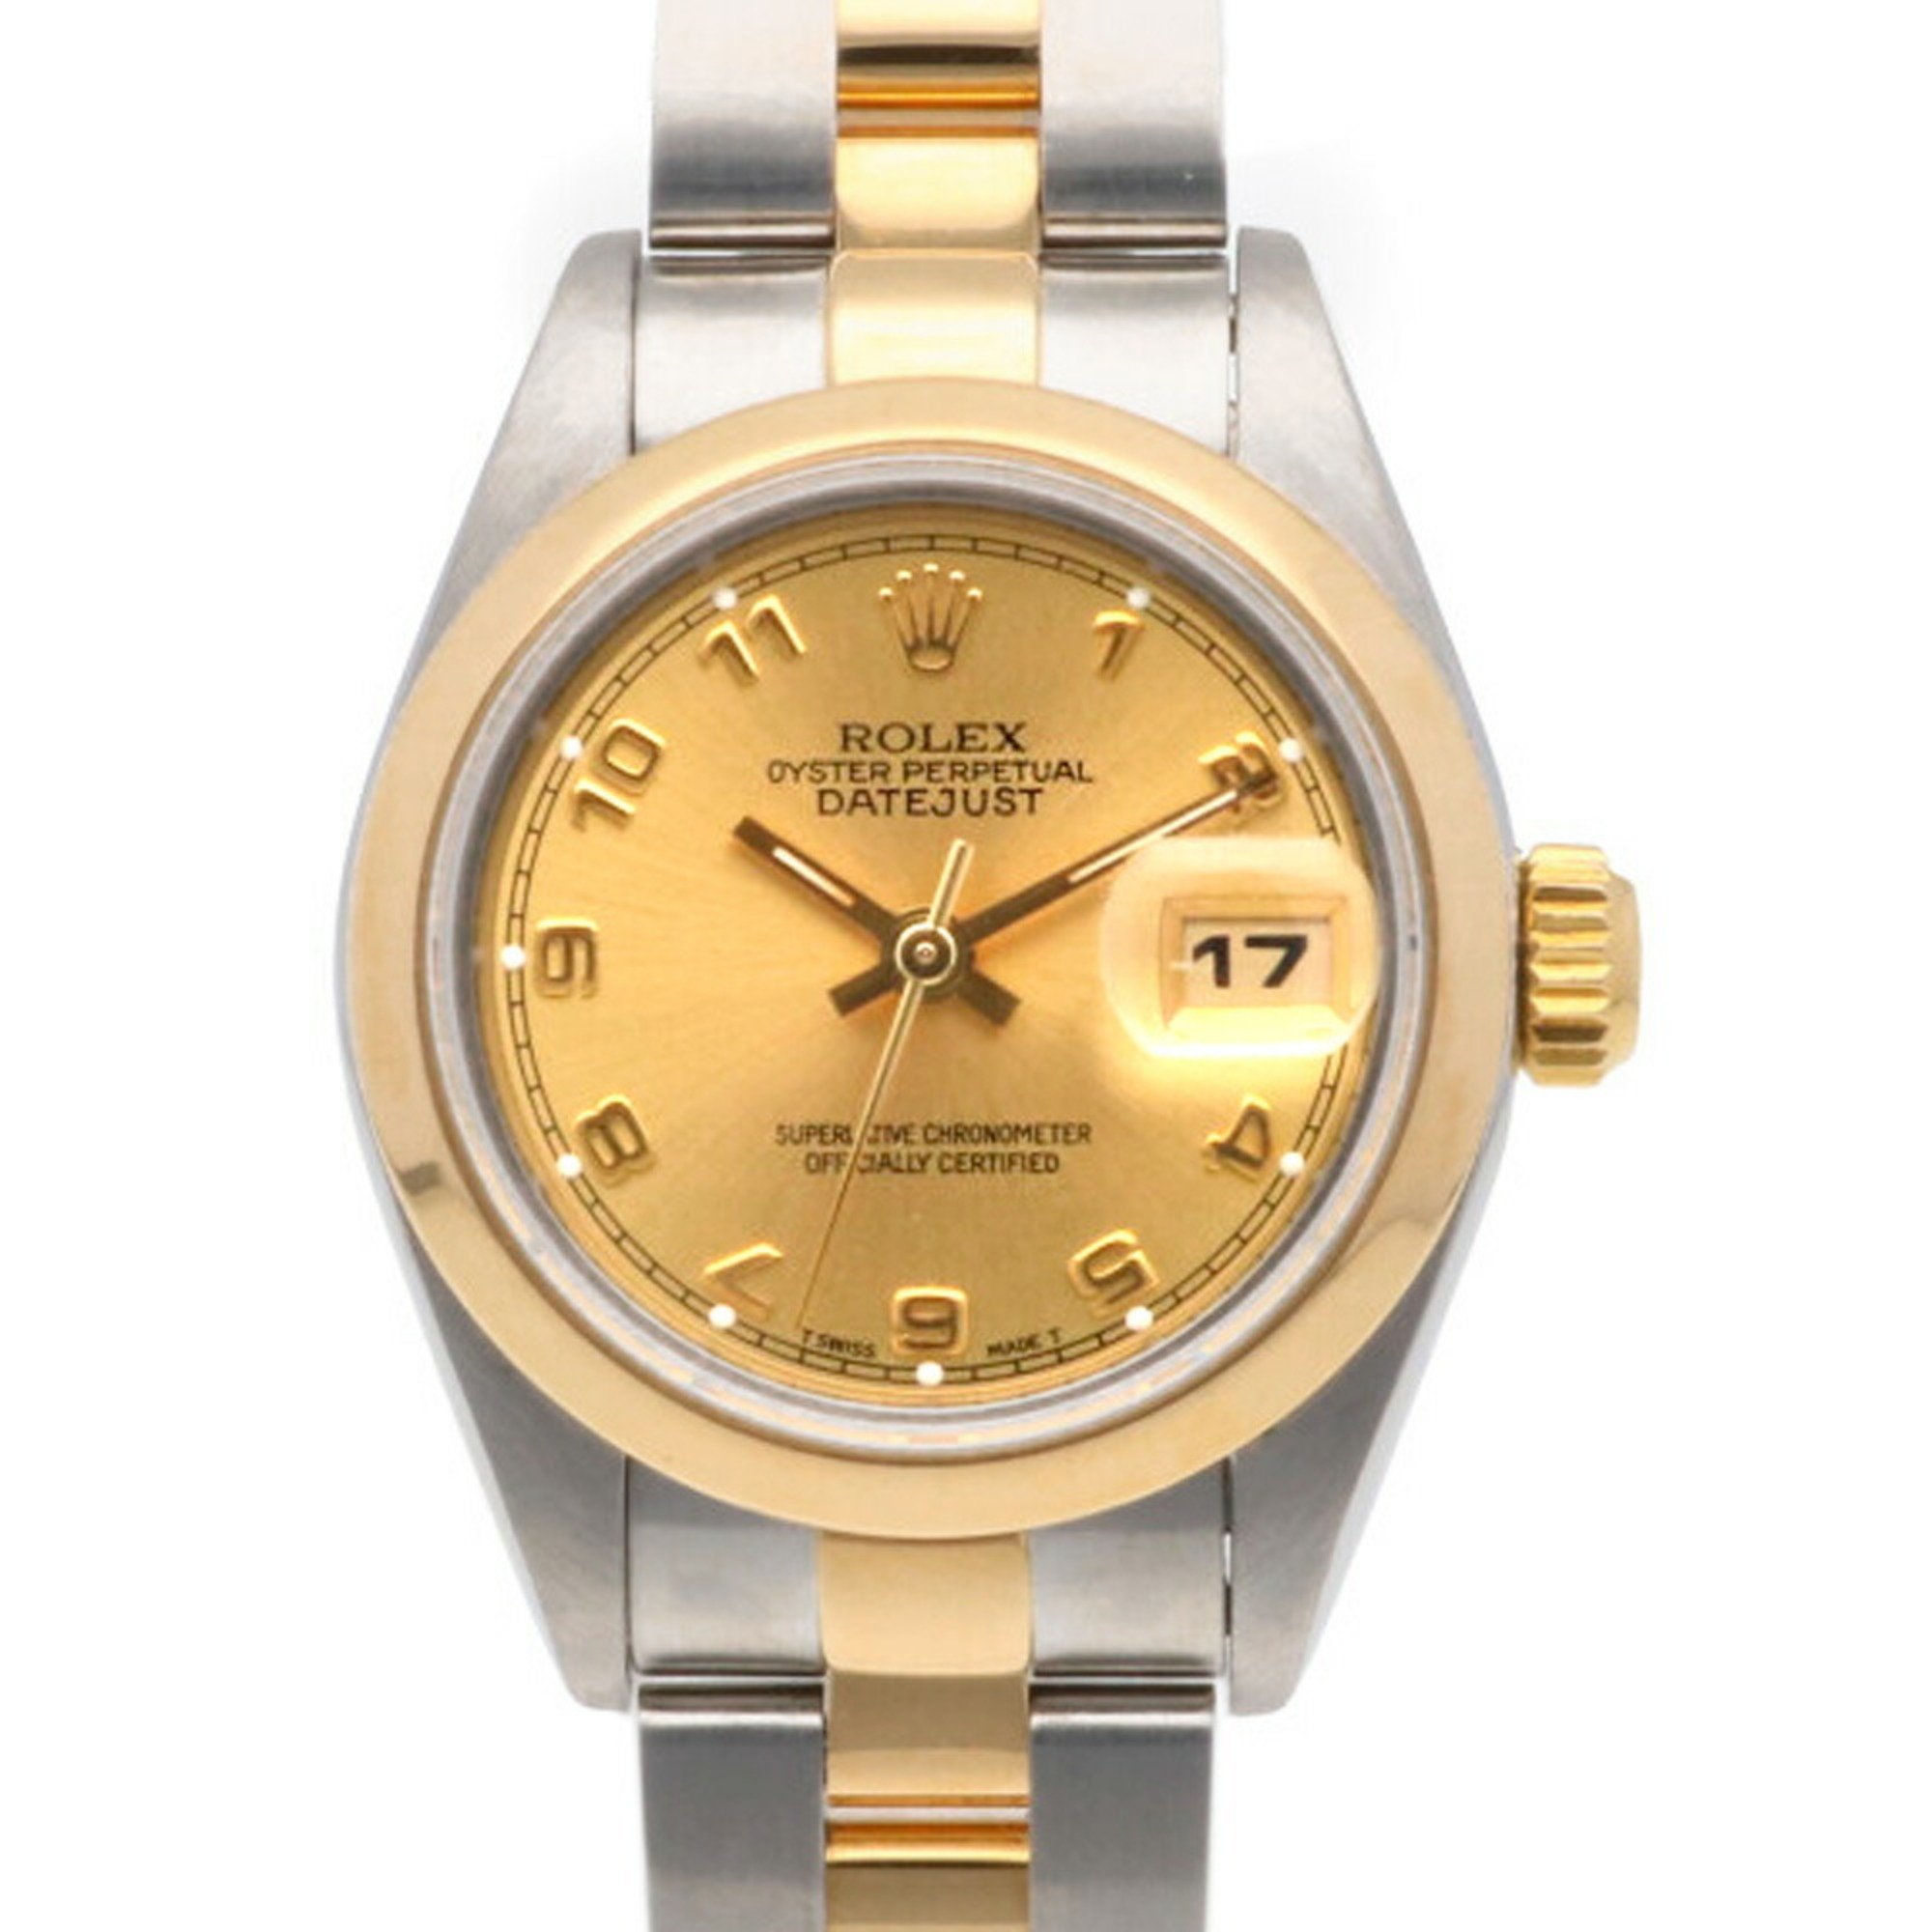 Rolex ROLEX Datejust Oyster Perpetual Watch Stainless Steel 69163 Ladies